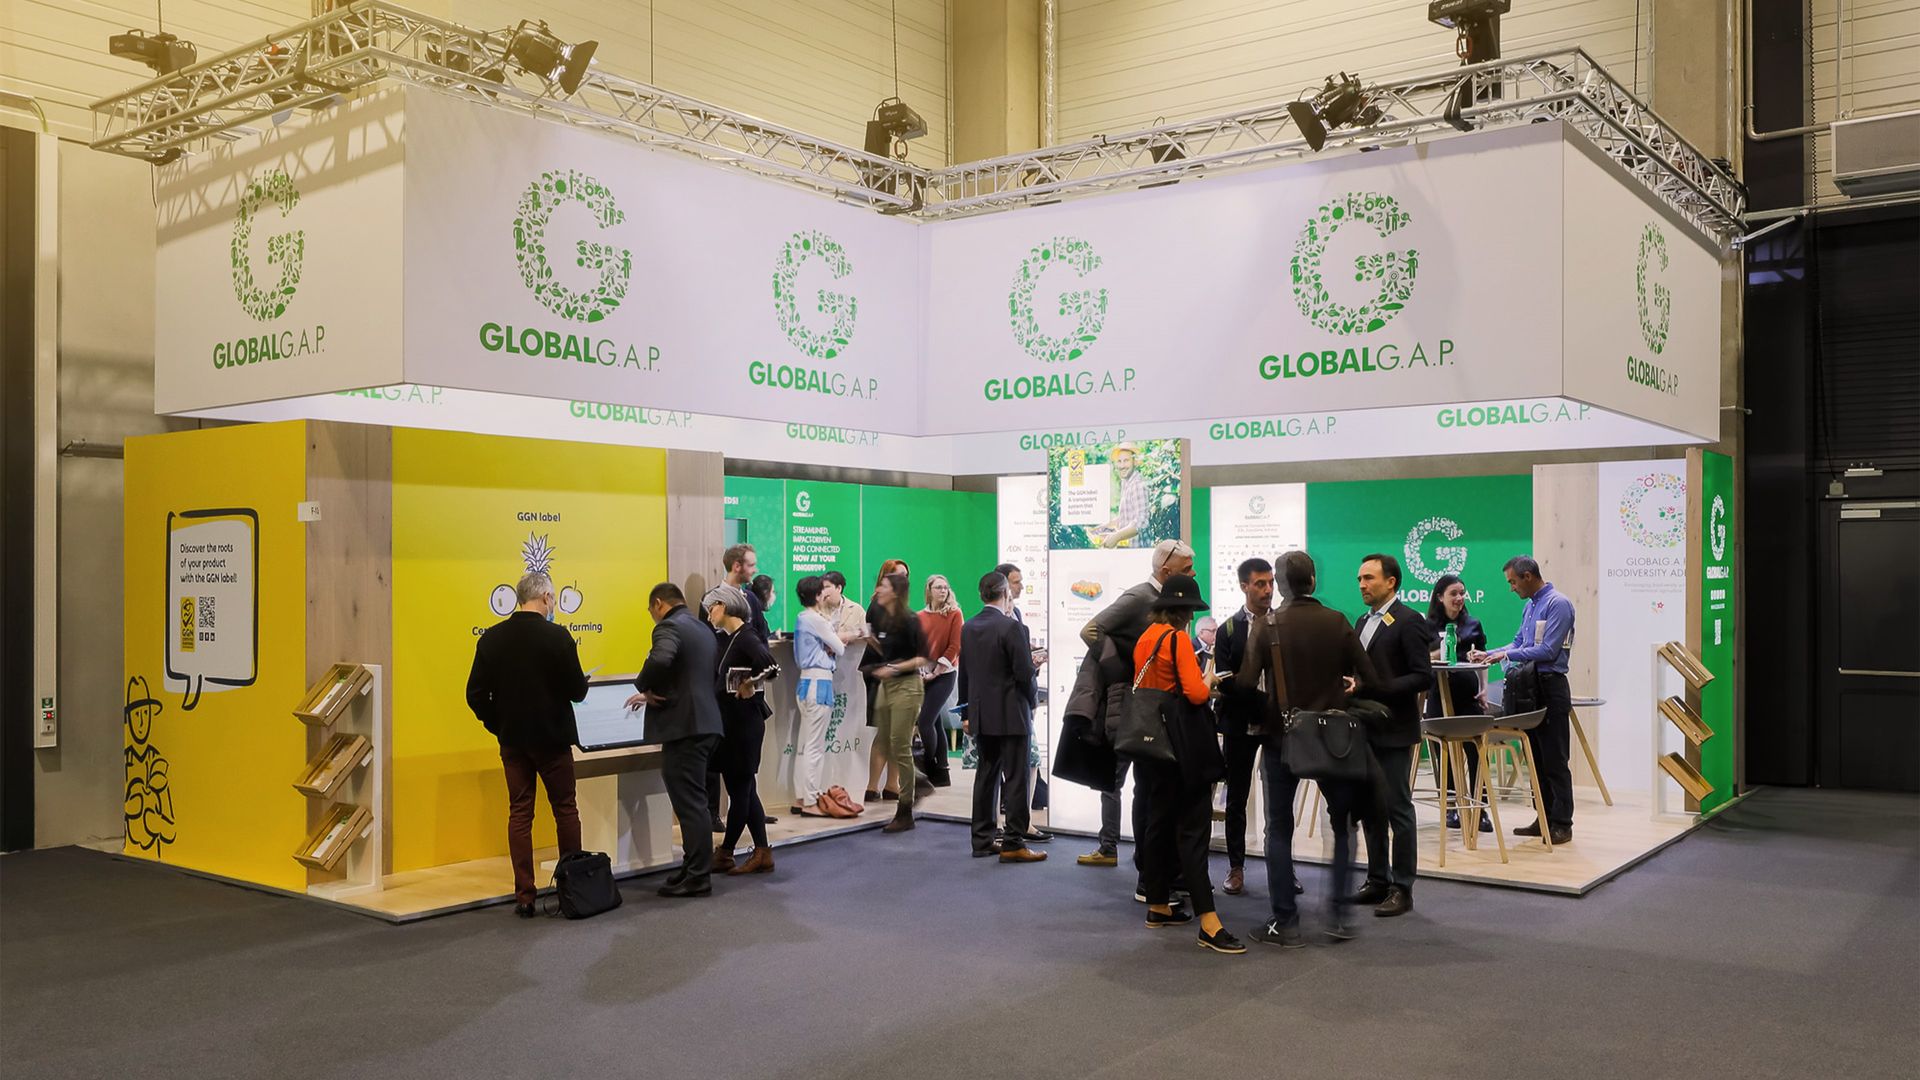 Image of the GLOBALG.A.P. logo on a trade fair booth